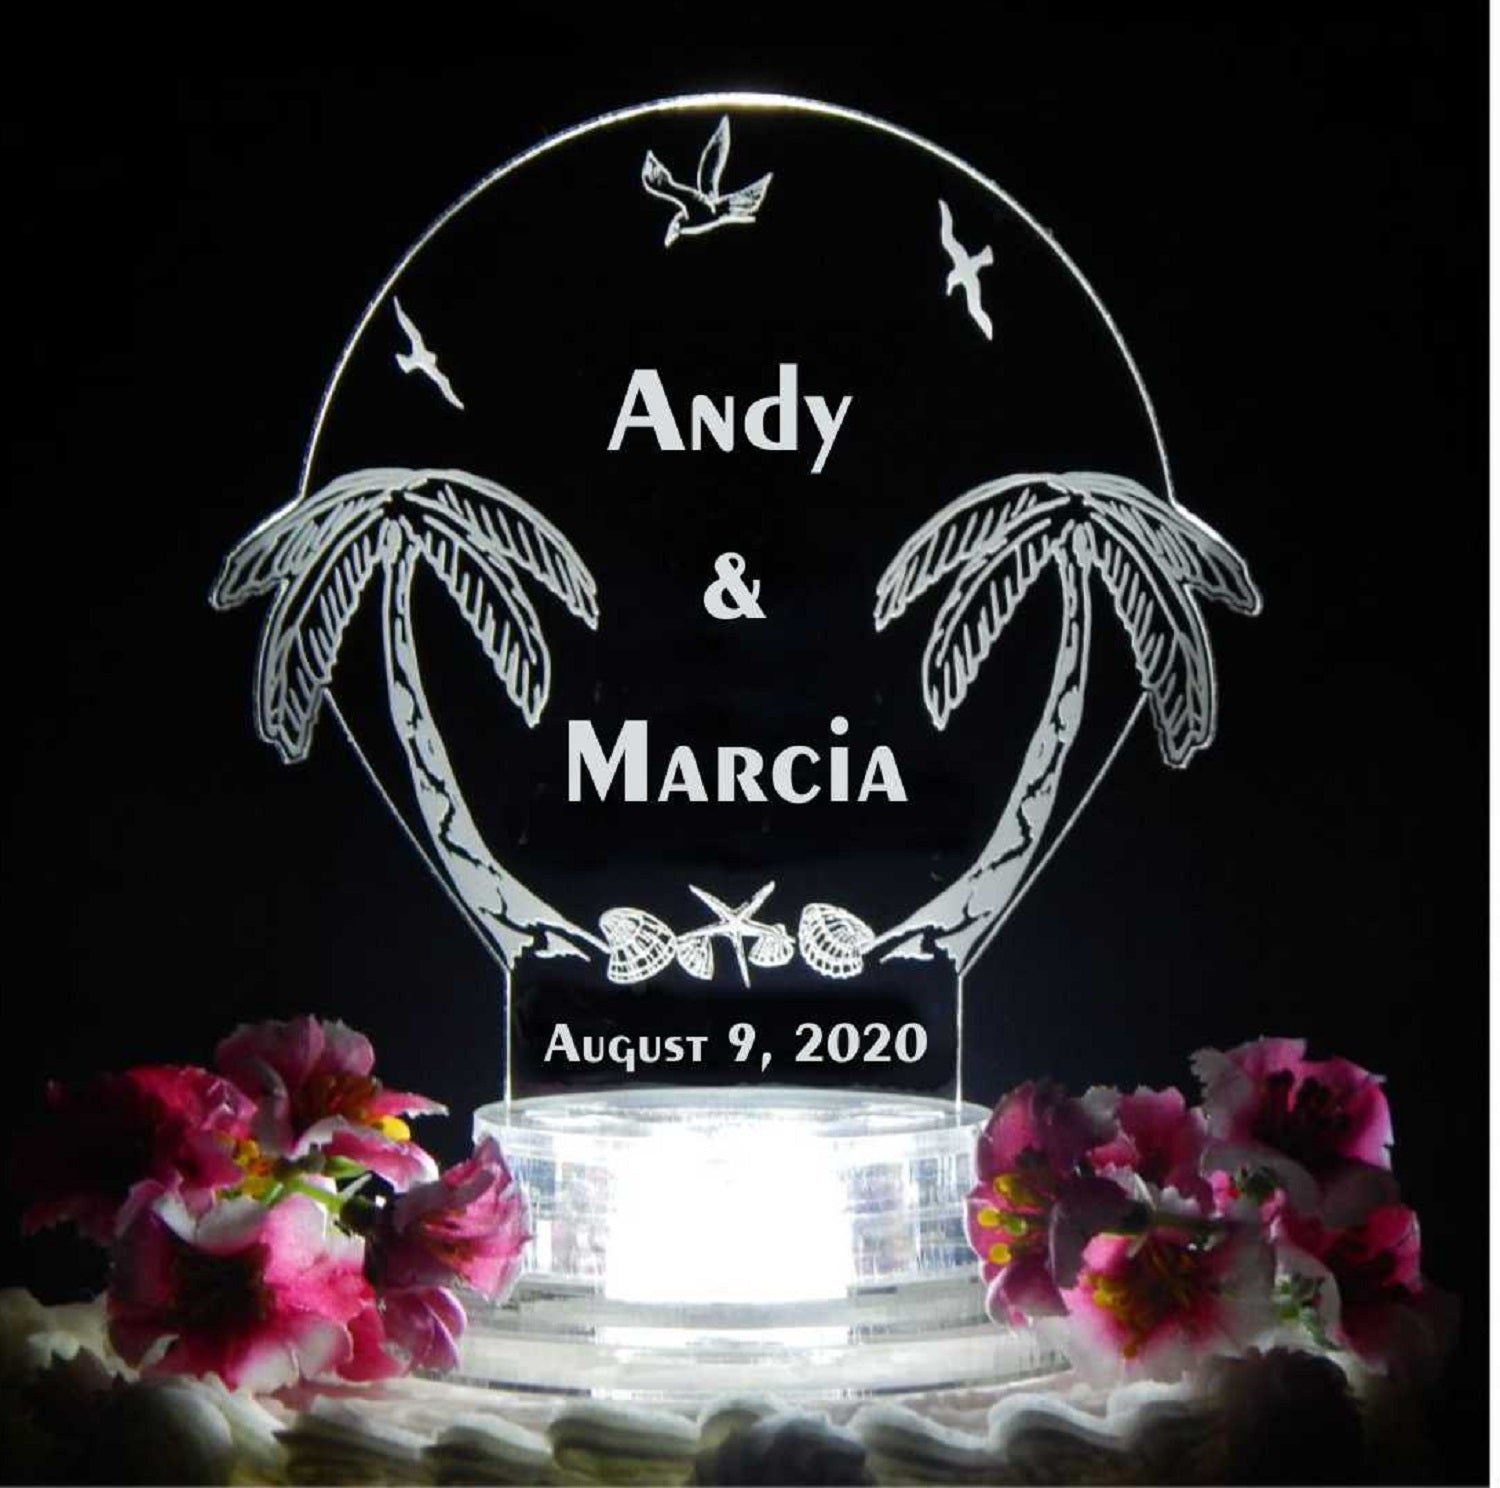 acrylic cake topper designed with palm trees along with names and date